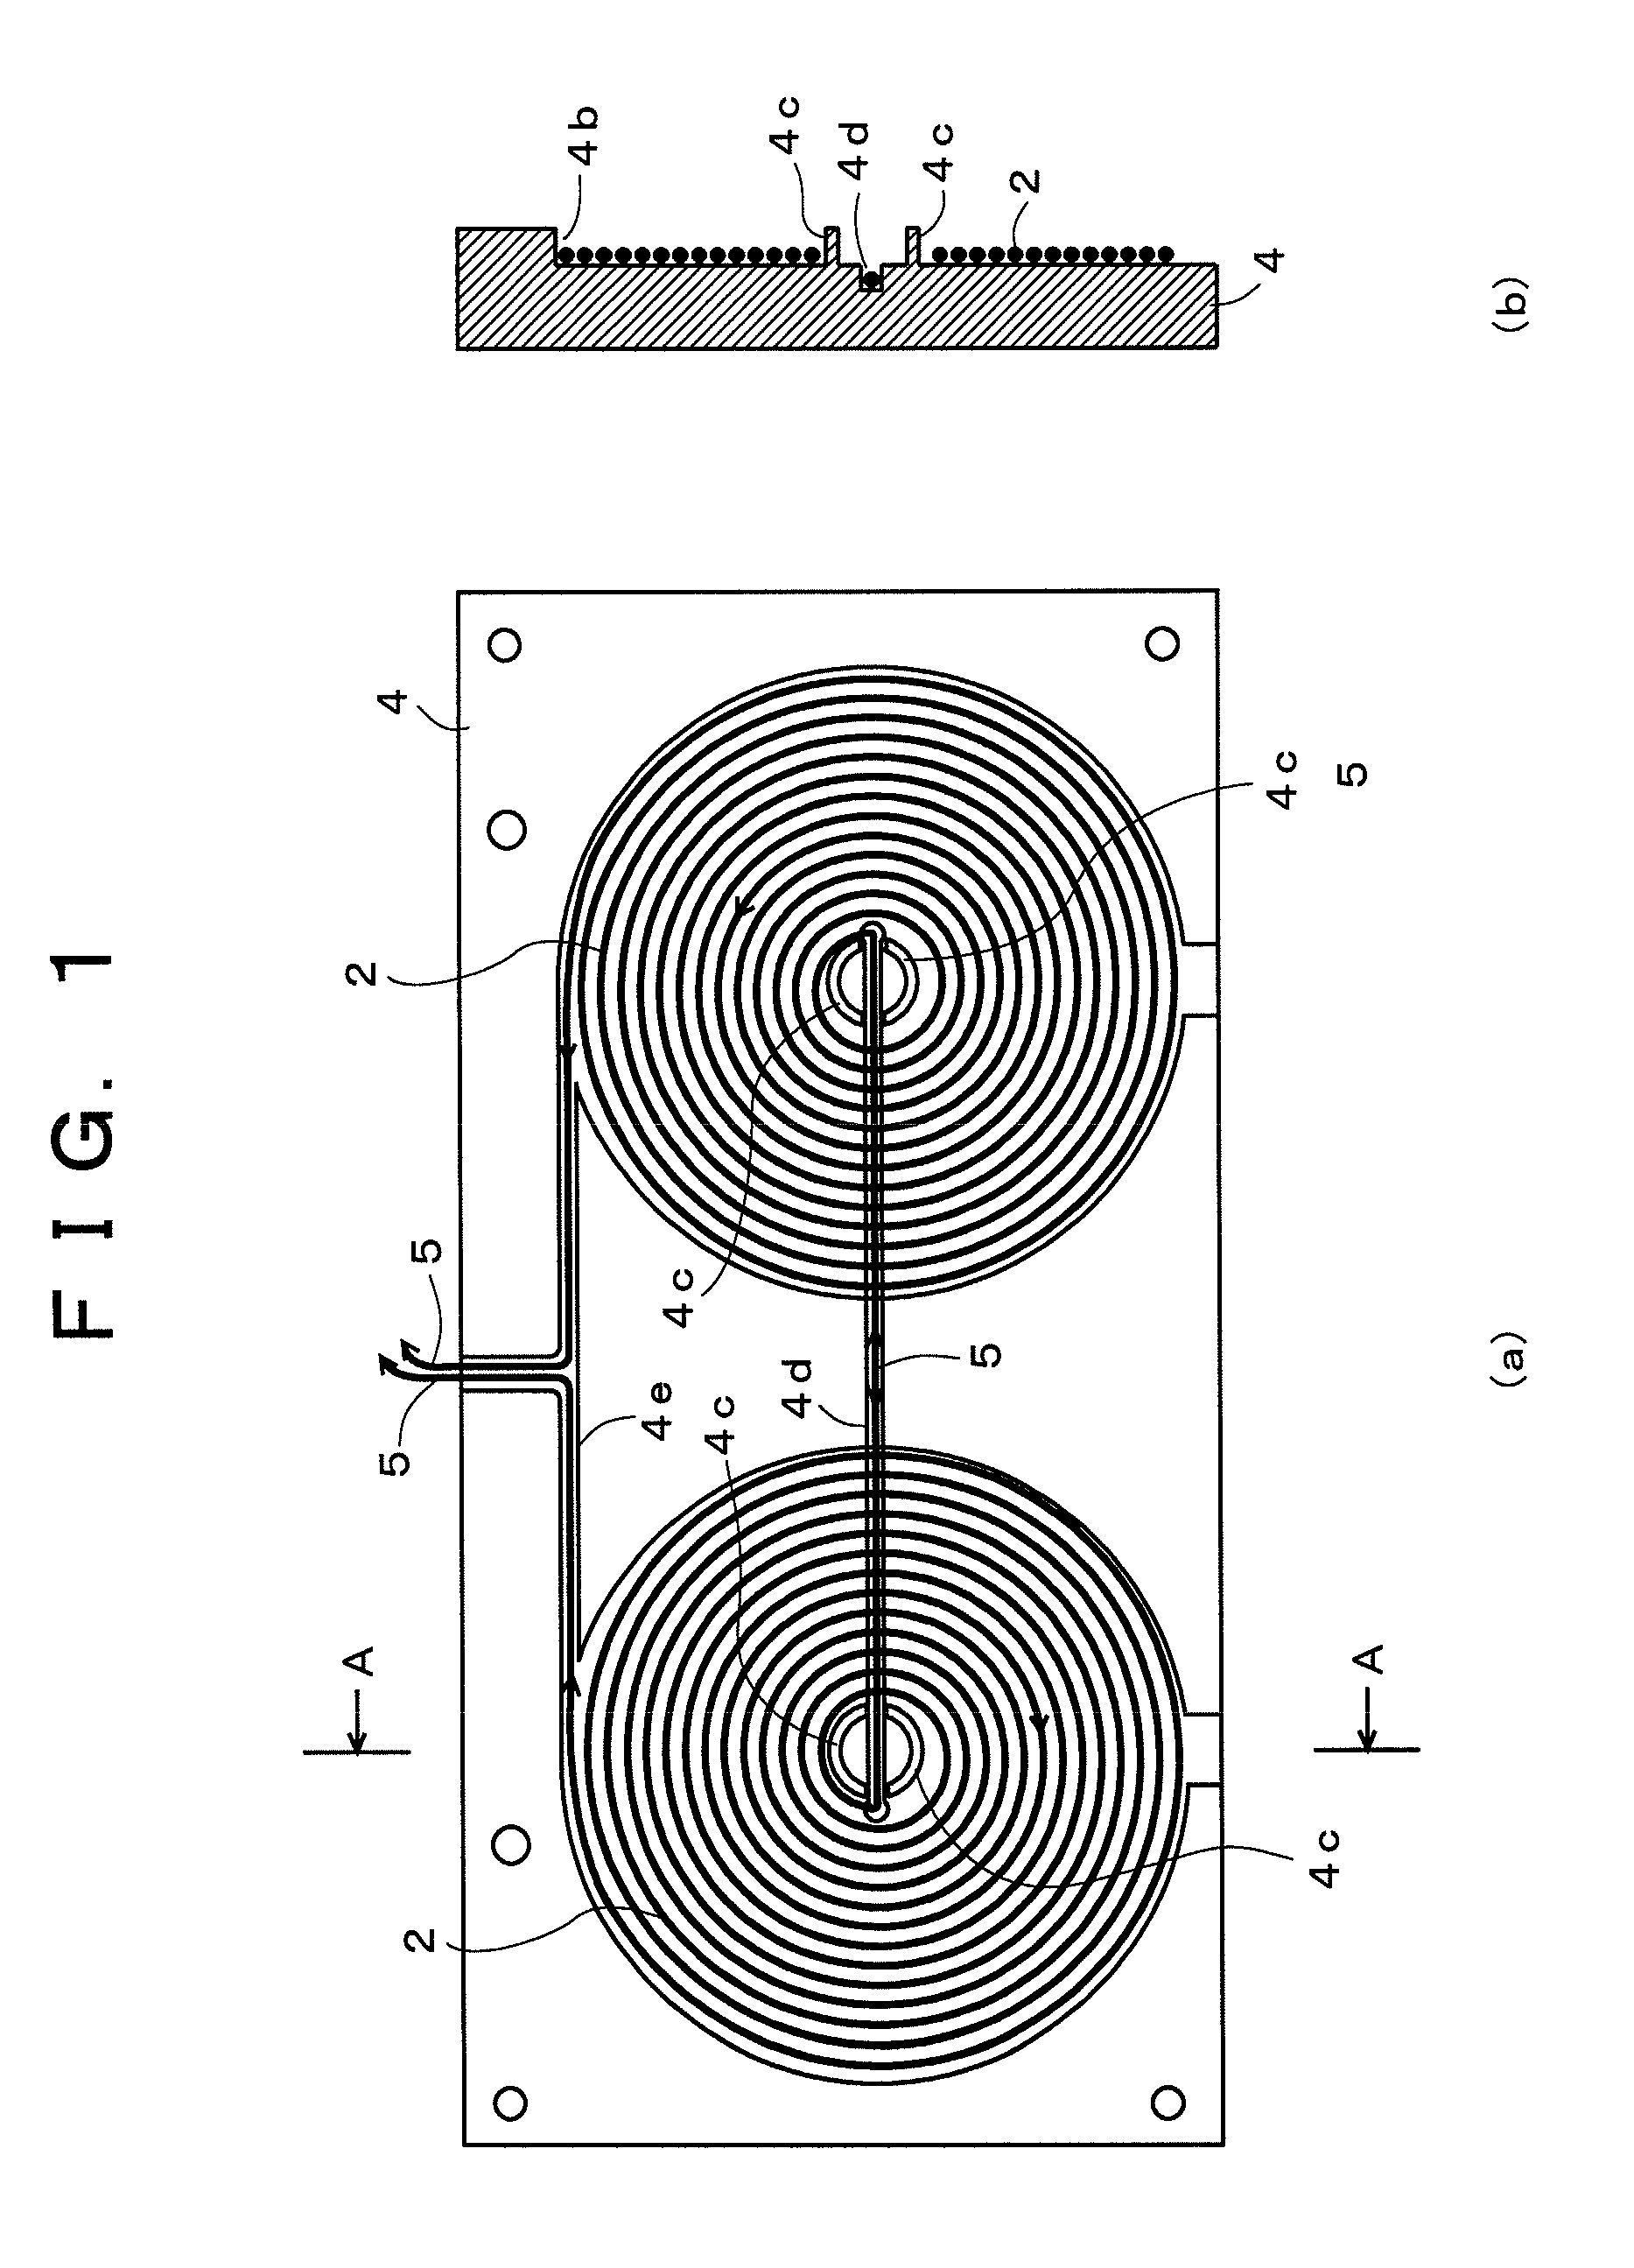 Method for preventing deterioration of edible oil or industrial oil and apparatus therefor